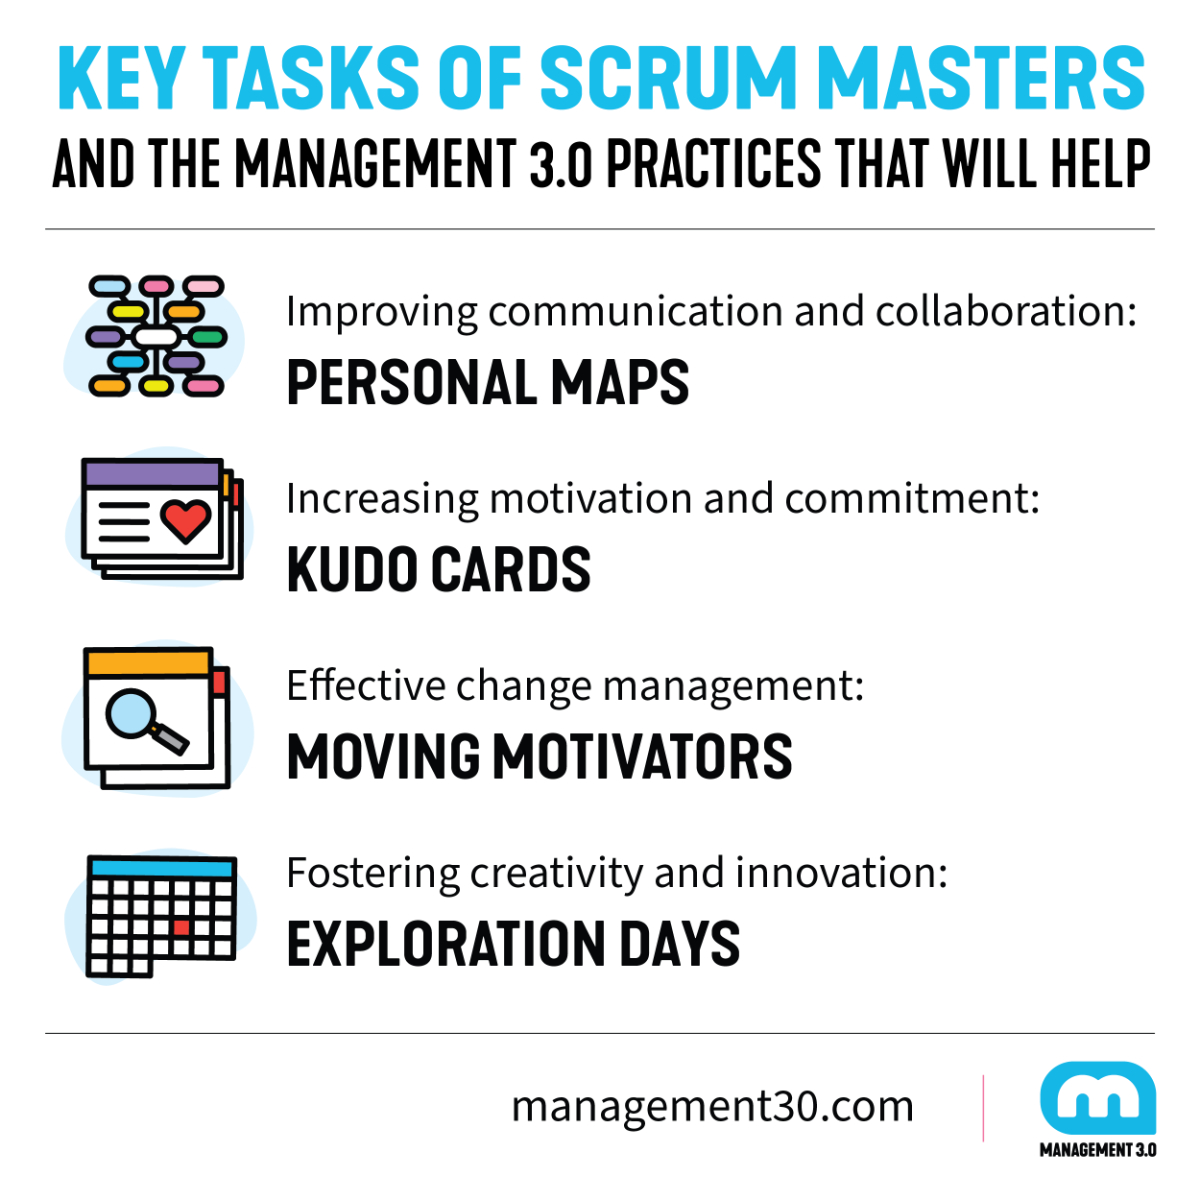 Key Tasks of Scrum Masters – and how Management 3.0 practices can support